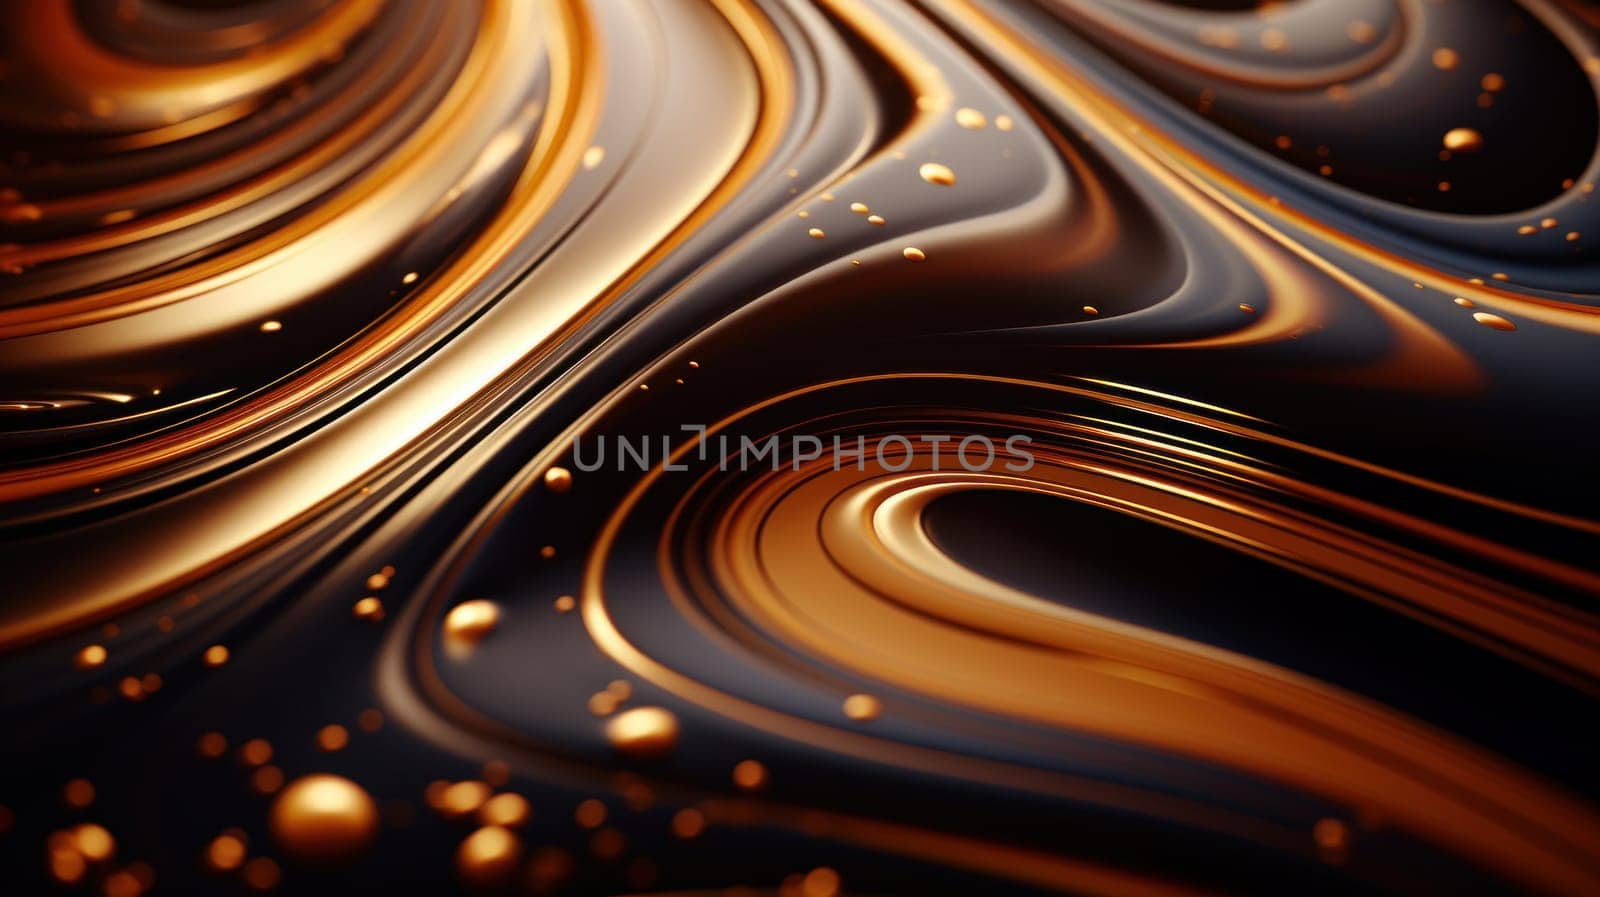 A close up of a black and gold swirl pattern on the surface